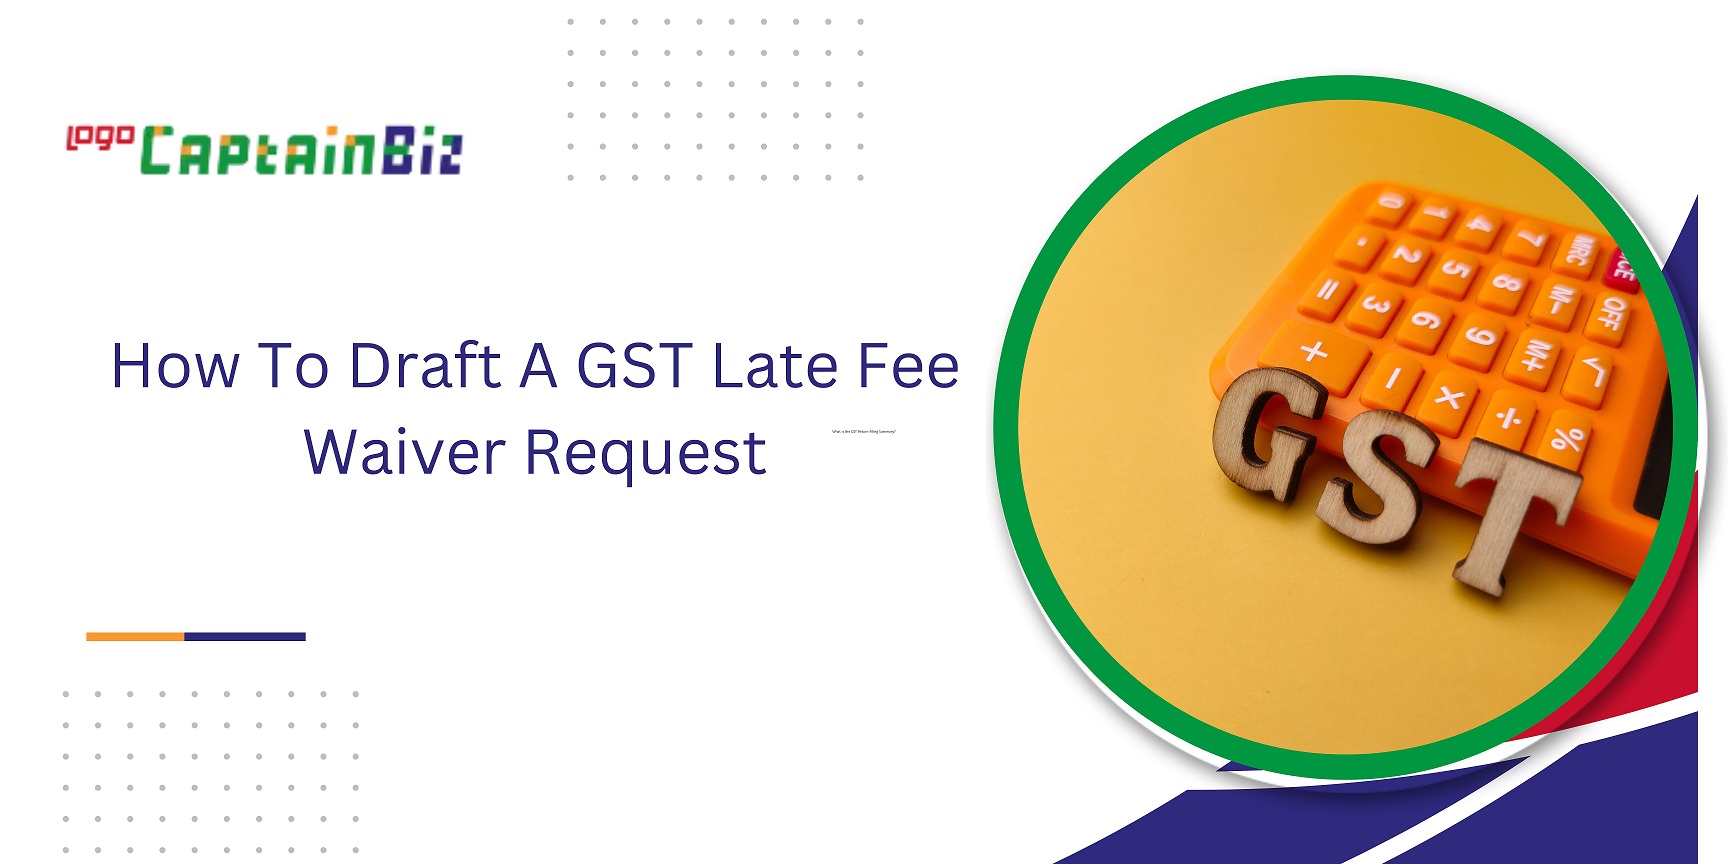 CaptainBiz: how to draft a gst late fee waiver request